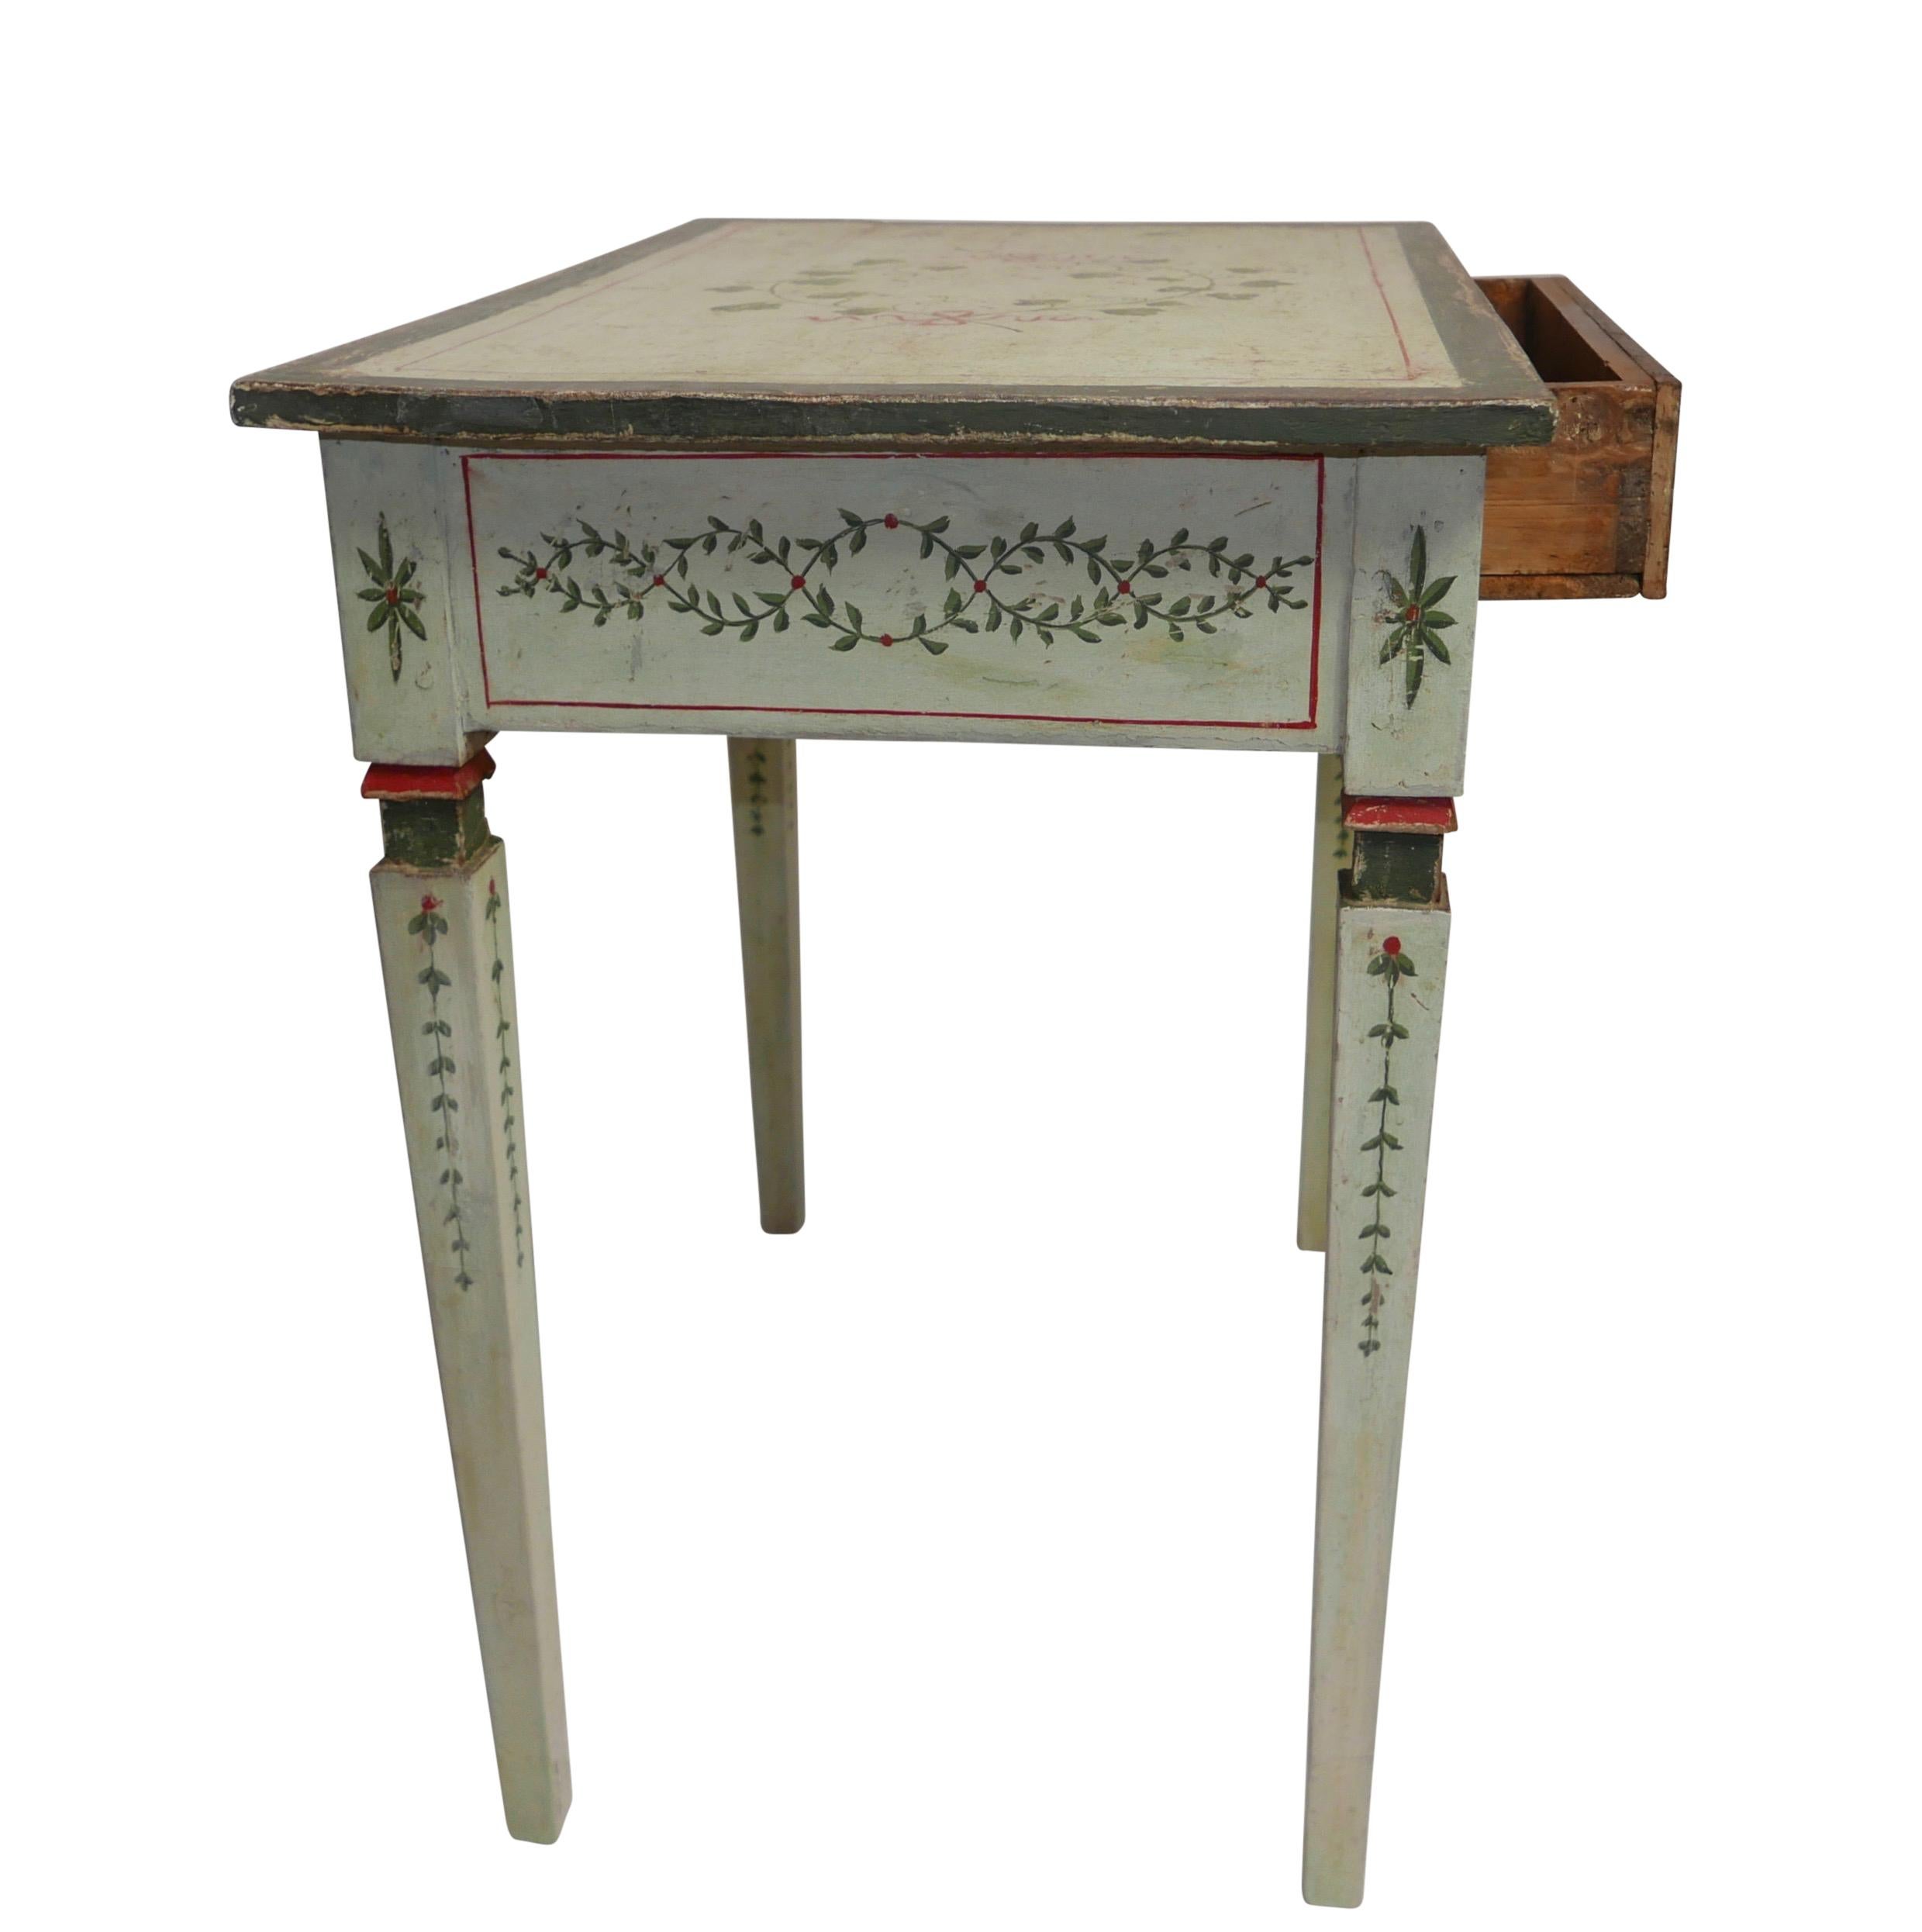 Wood Italian Painted Writing Table, Desk, Side Table, Early 19th Century